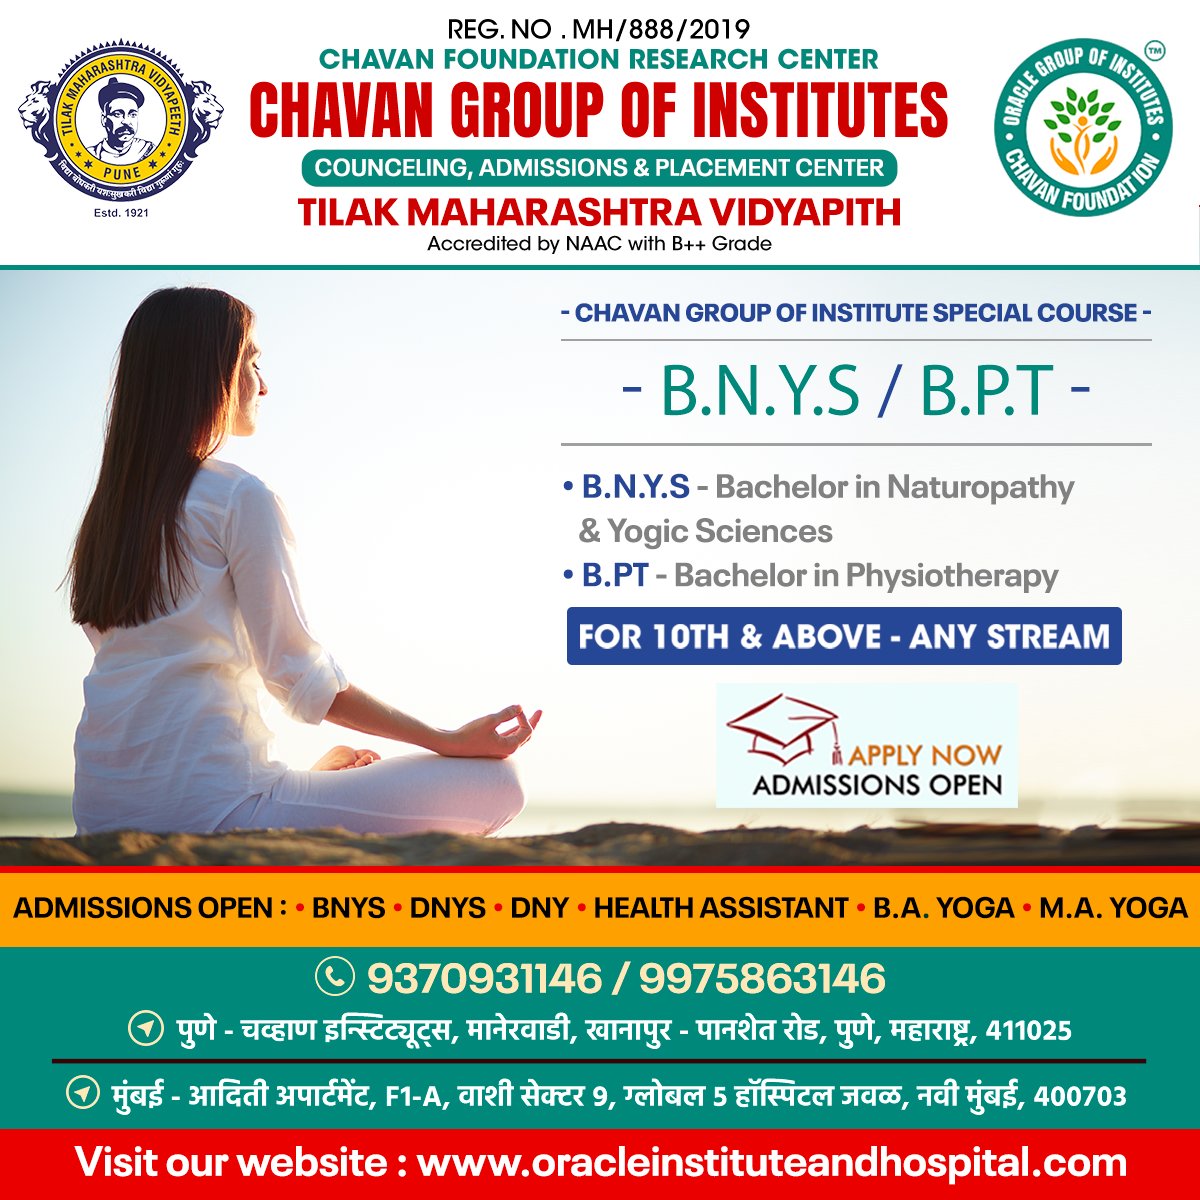 'Unlock the path to wellness and vitality at Chavan Naturopathy Institute! 🌿 Discover a healthier you with our special courses in natural healing. 🌟 #ChavanNaturopathy #HolisticHealth #WellnessJourney #NaturopathyCourses #DiscoverVitality'